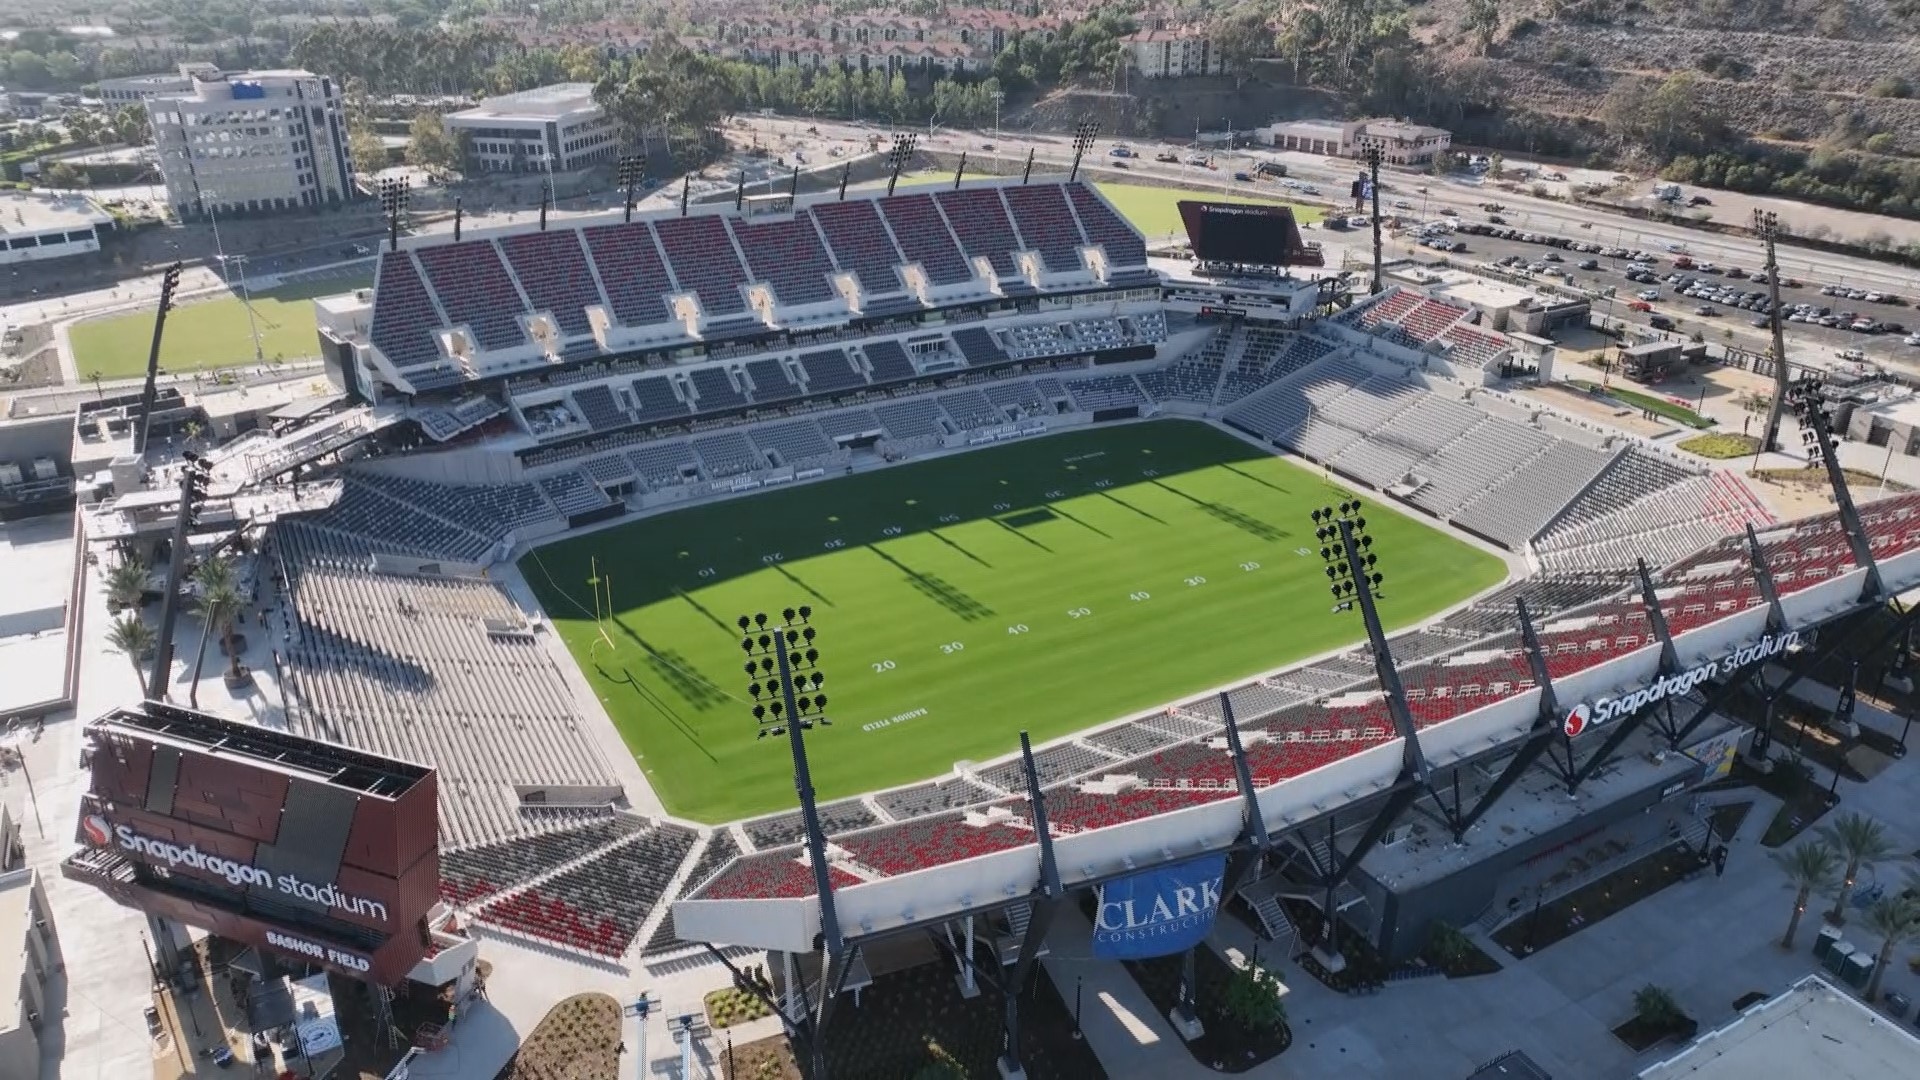 With Snapdragon Stadium set to open on September 3, CBS 8 got a firsthand look with unique point of views at SDSU's new stadium.